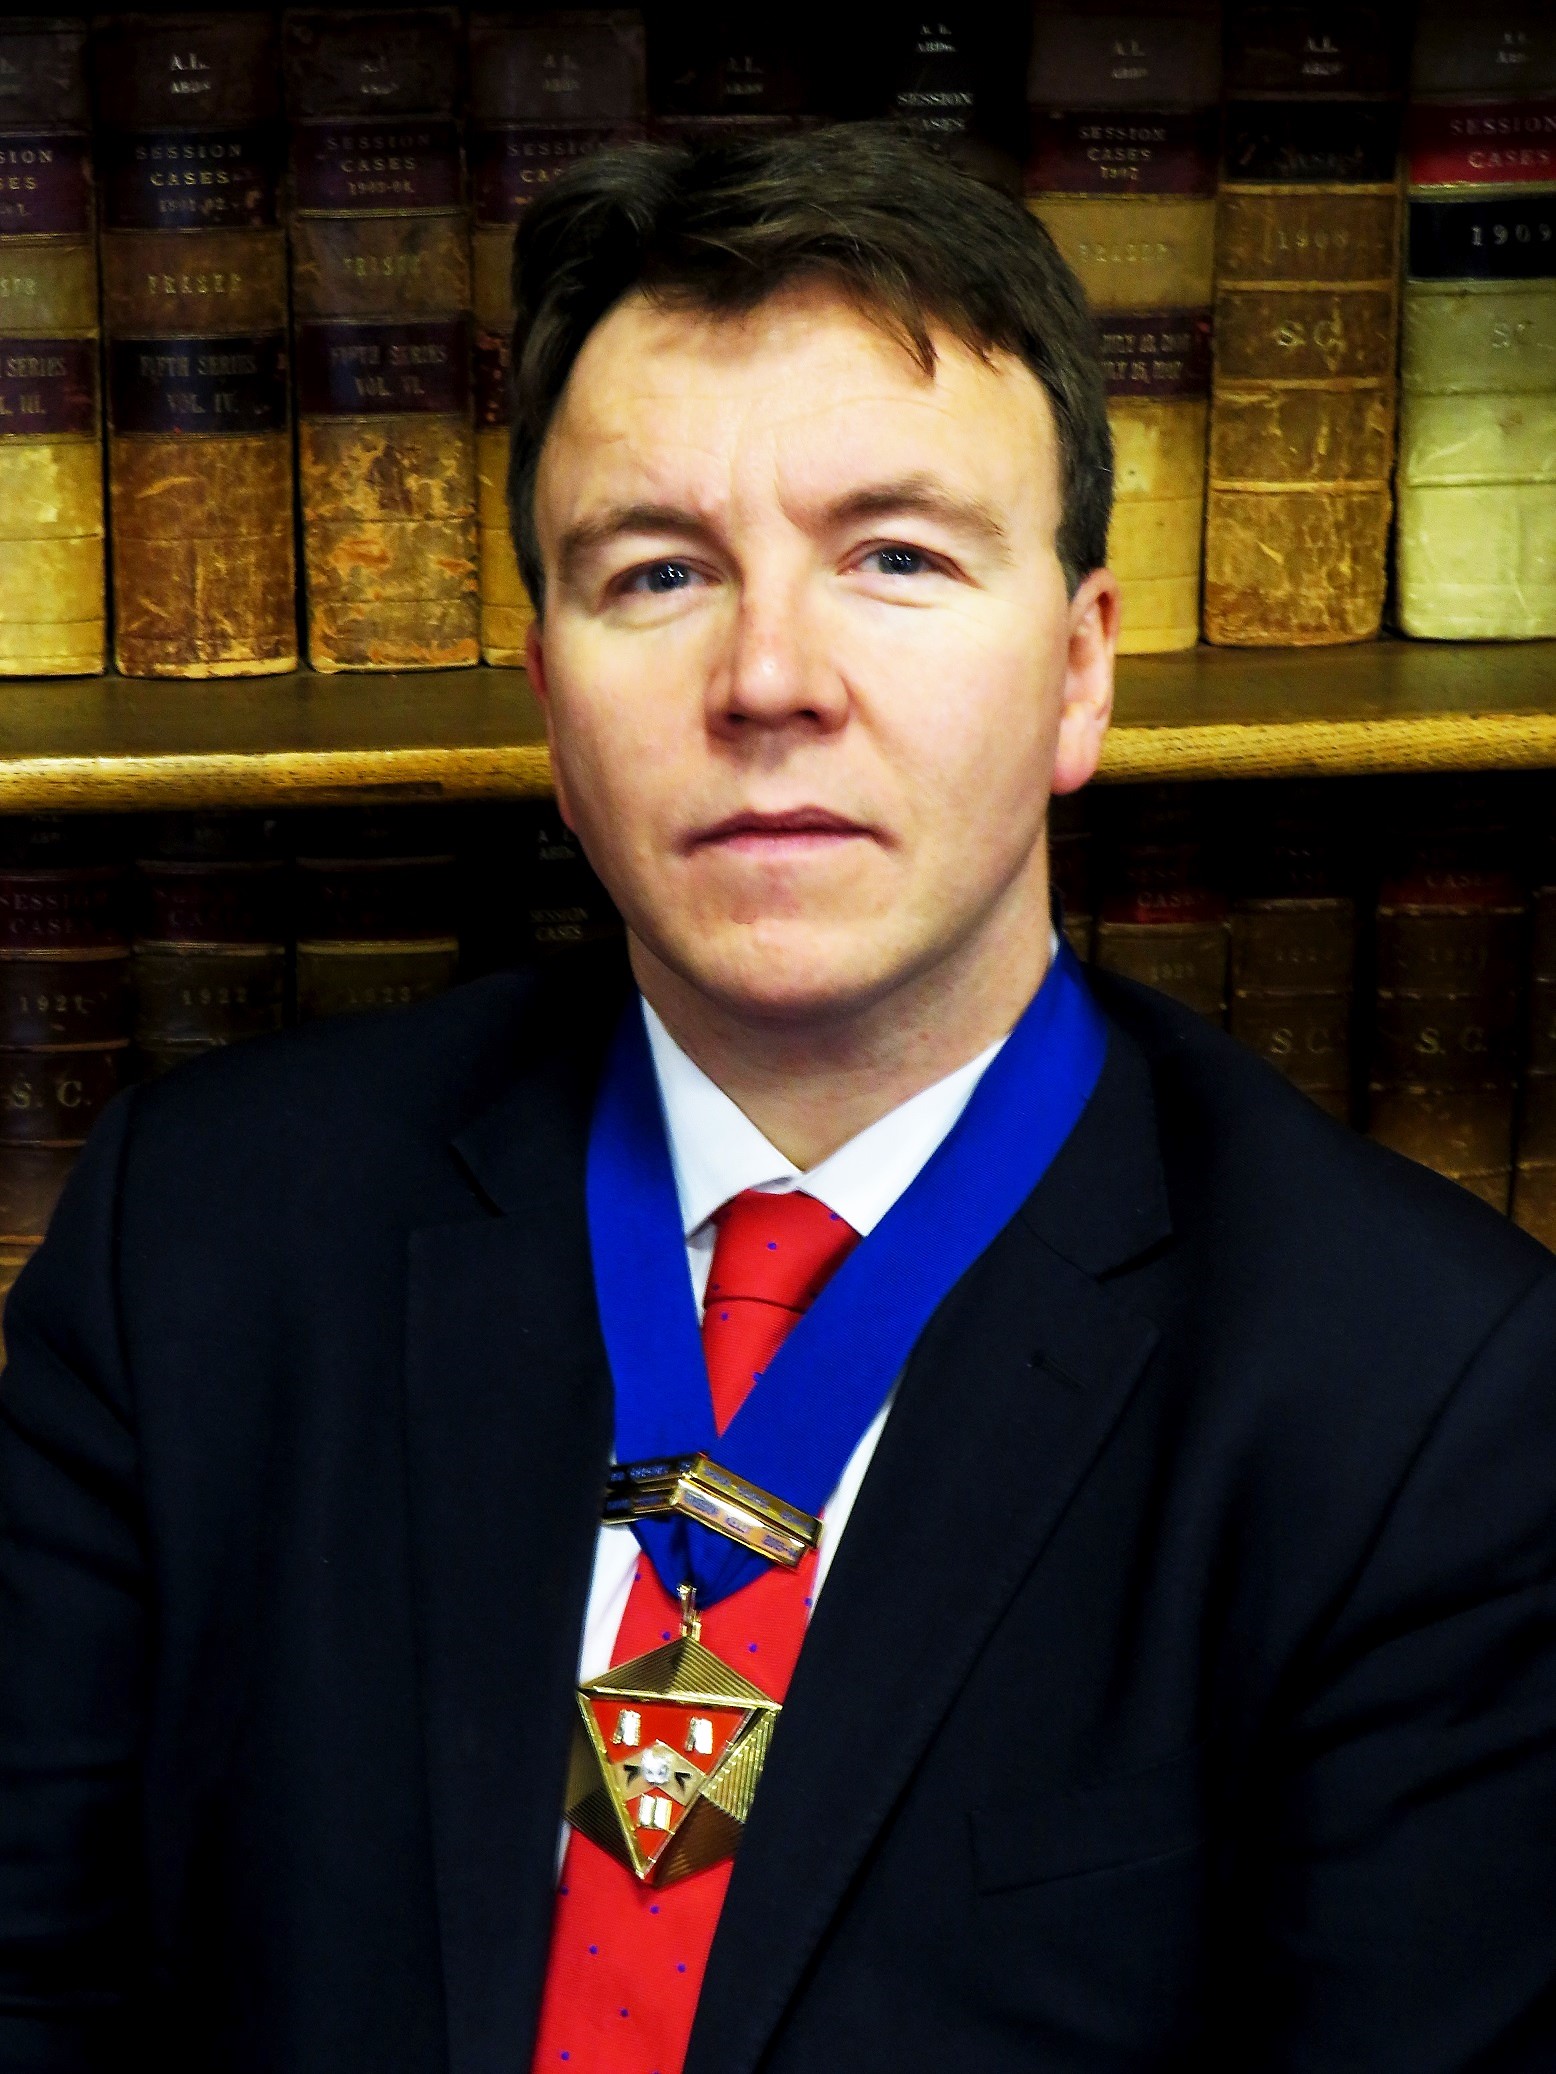 Martin Ewan appointed president of Society of Advocates in Aberdeen